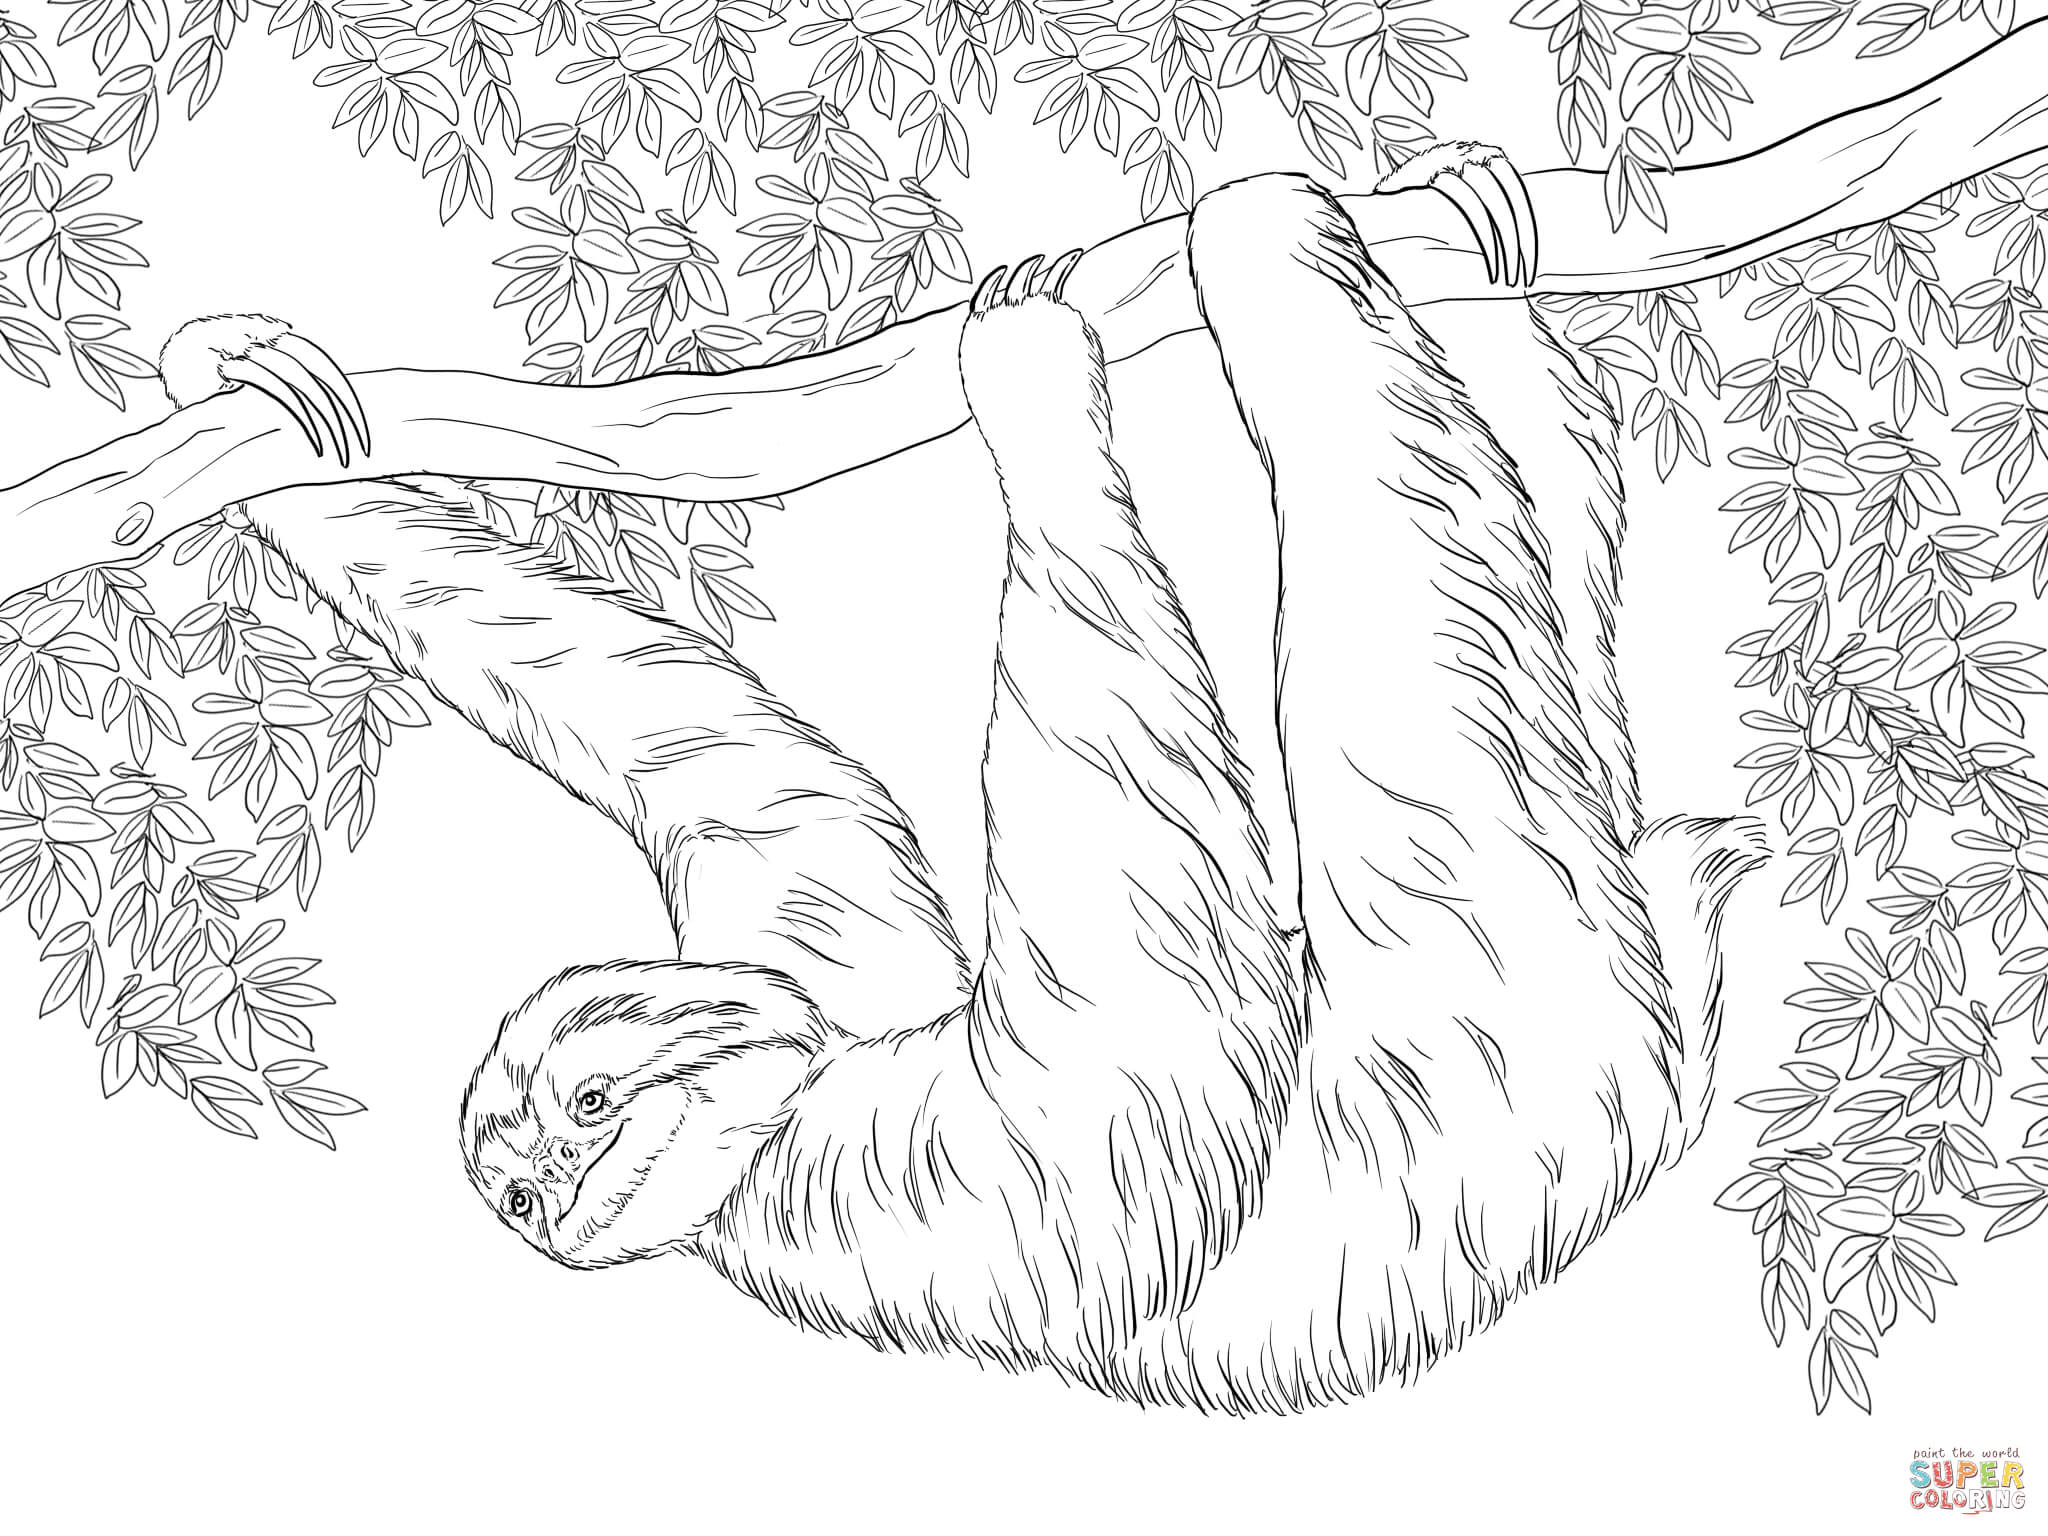 Three Toed Sloth coloring #2, Download drawings